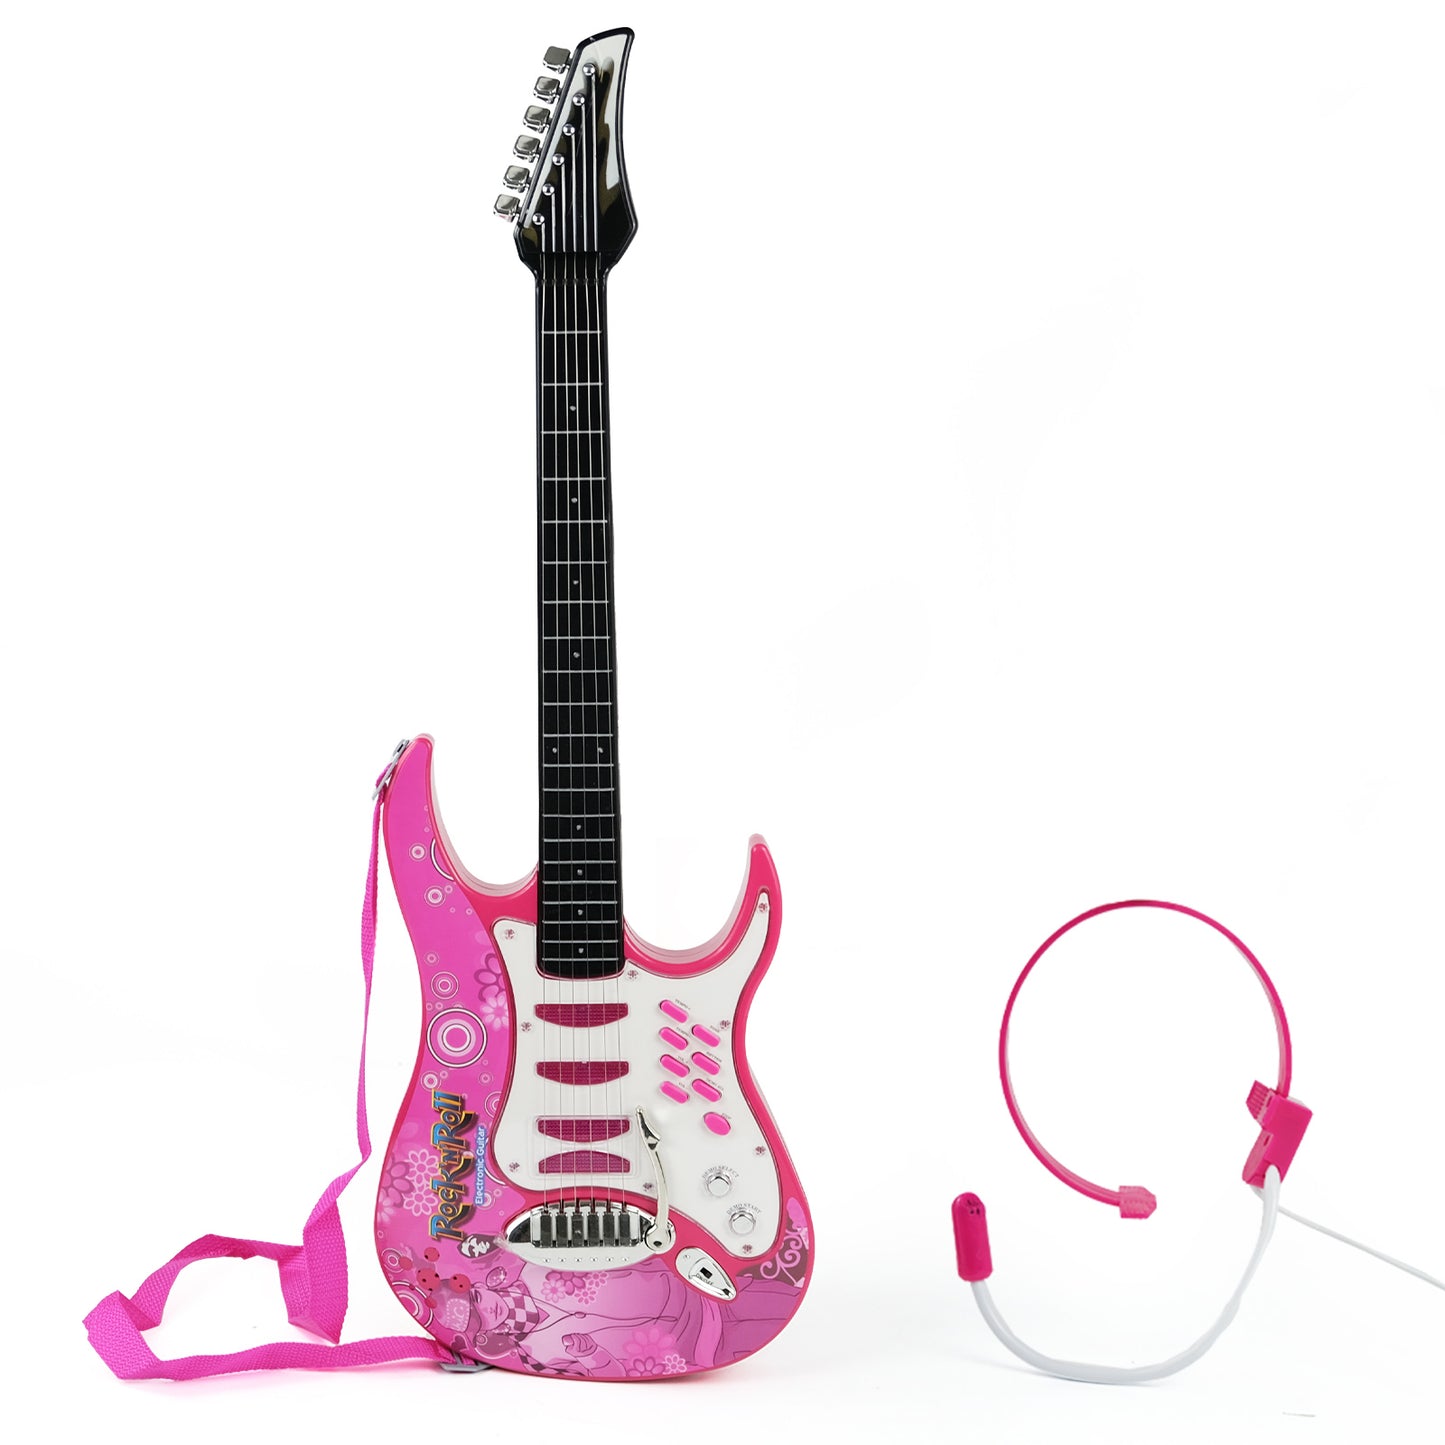 AOQIMITENJOY Musical Instrument Electronic Guitar Toys with Earhook Microphone LED Lighting Karaoke Birthday Gifts for Boys and Girls 3 Year Old+ HK-8010B